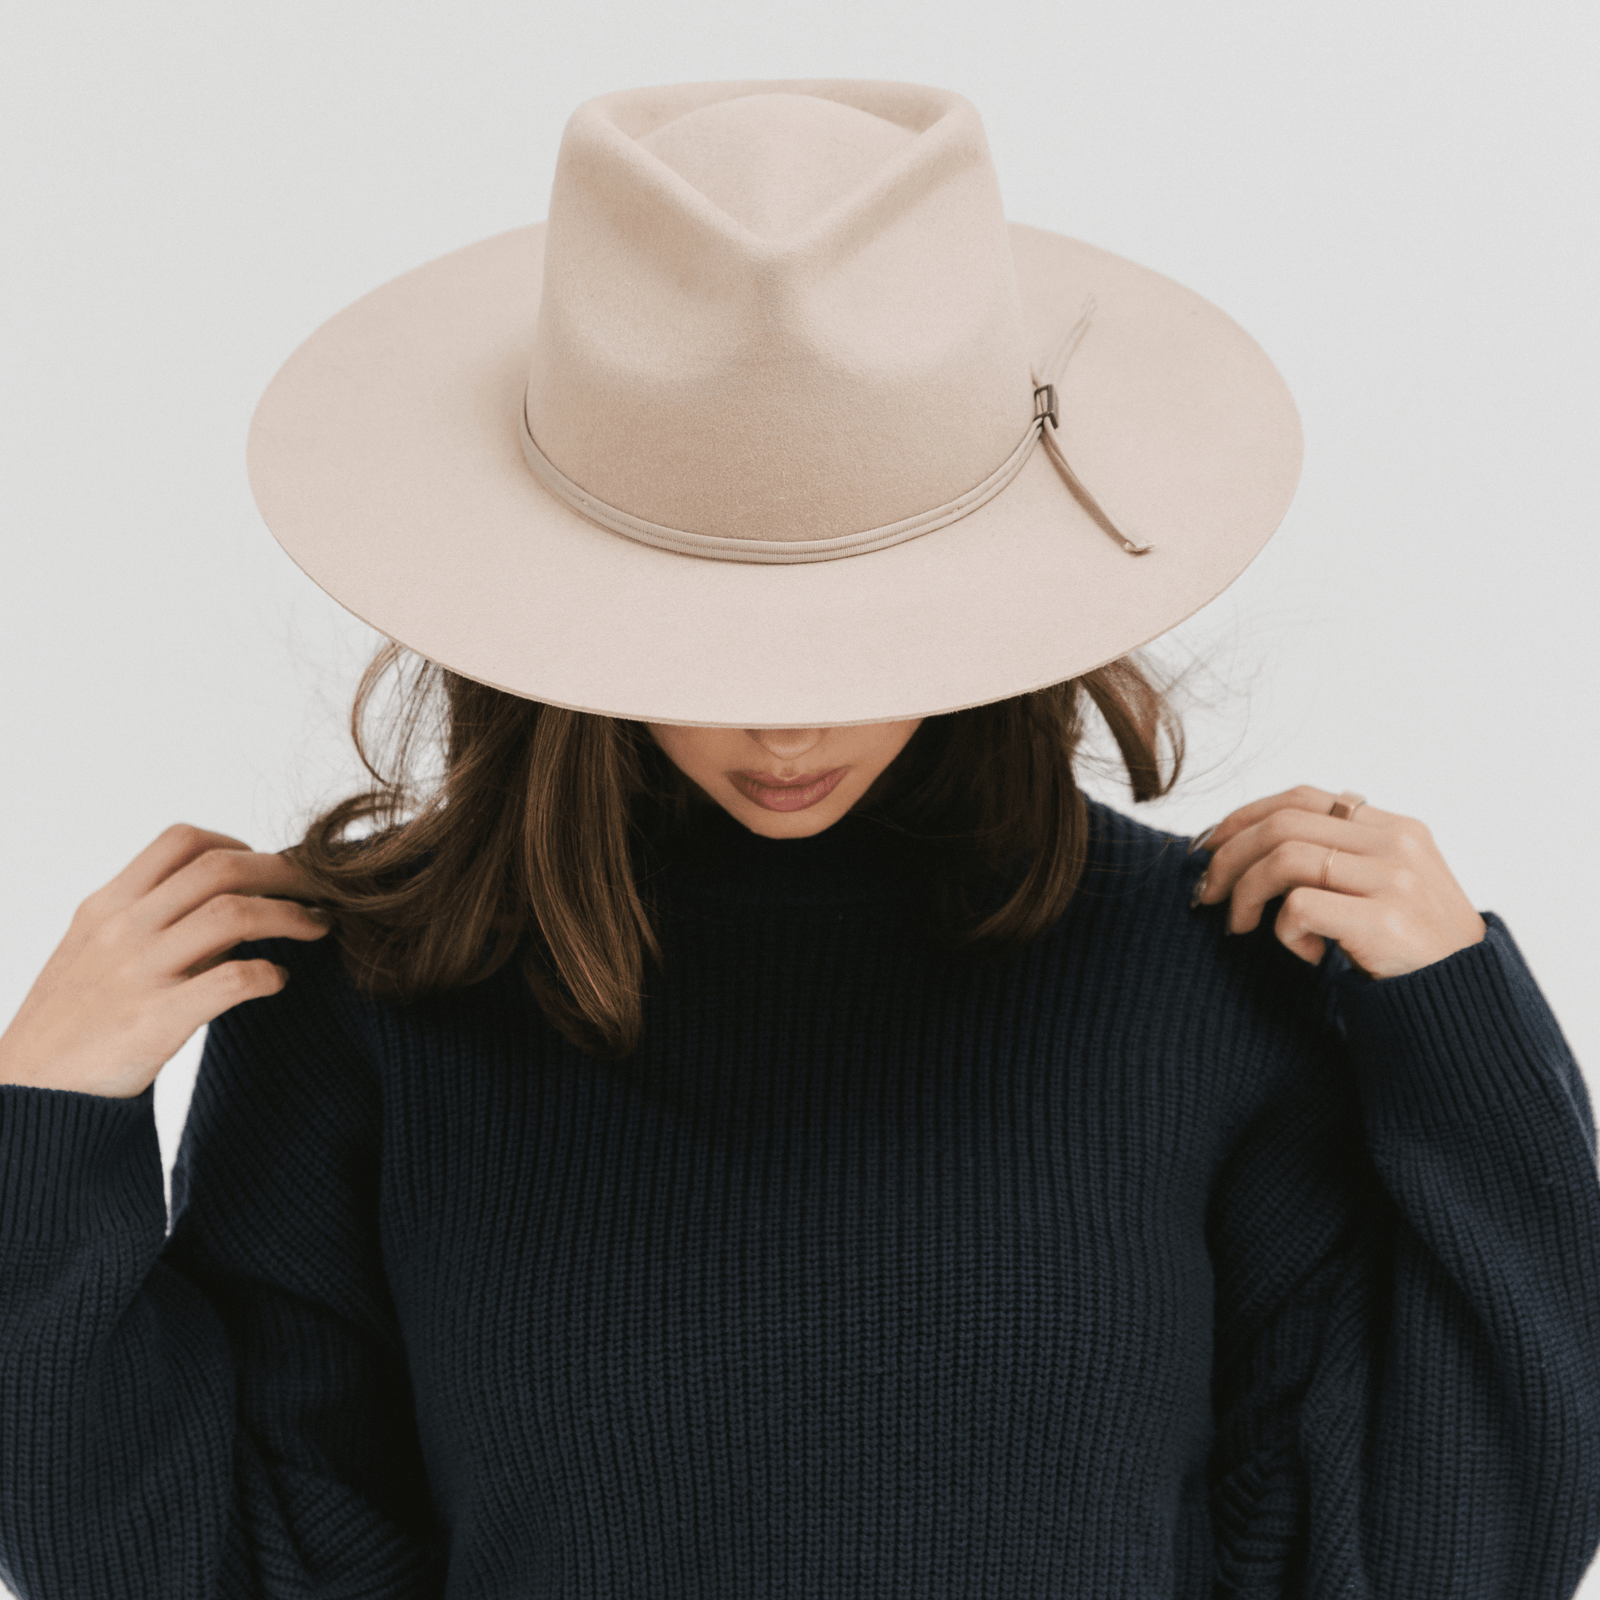 Womens Wide Brim Hats - Fedoras, Ranchers, & More